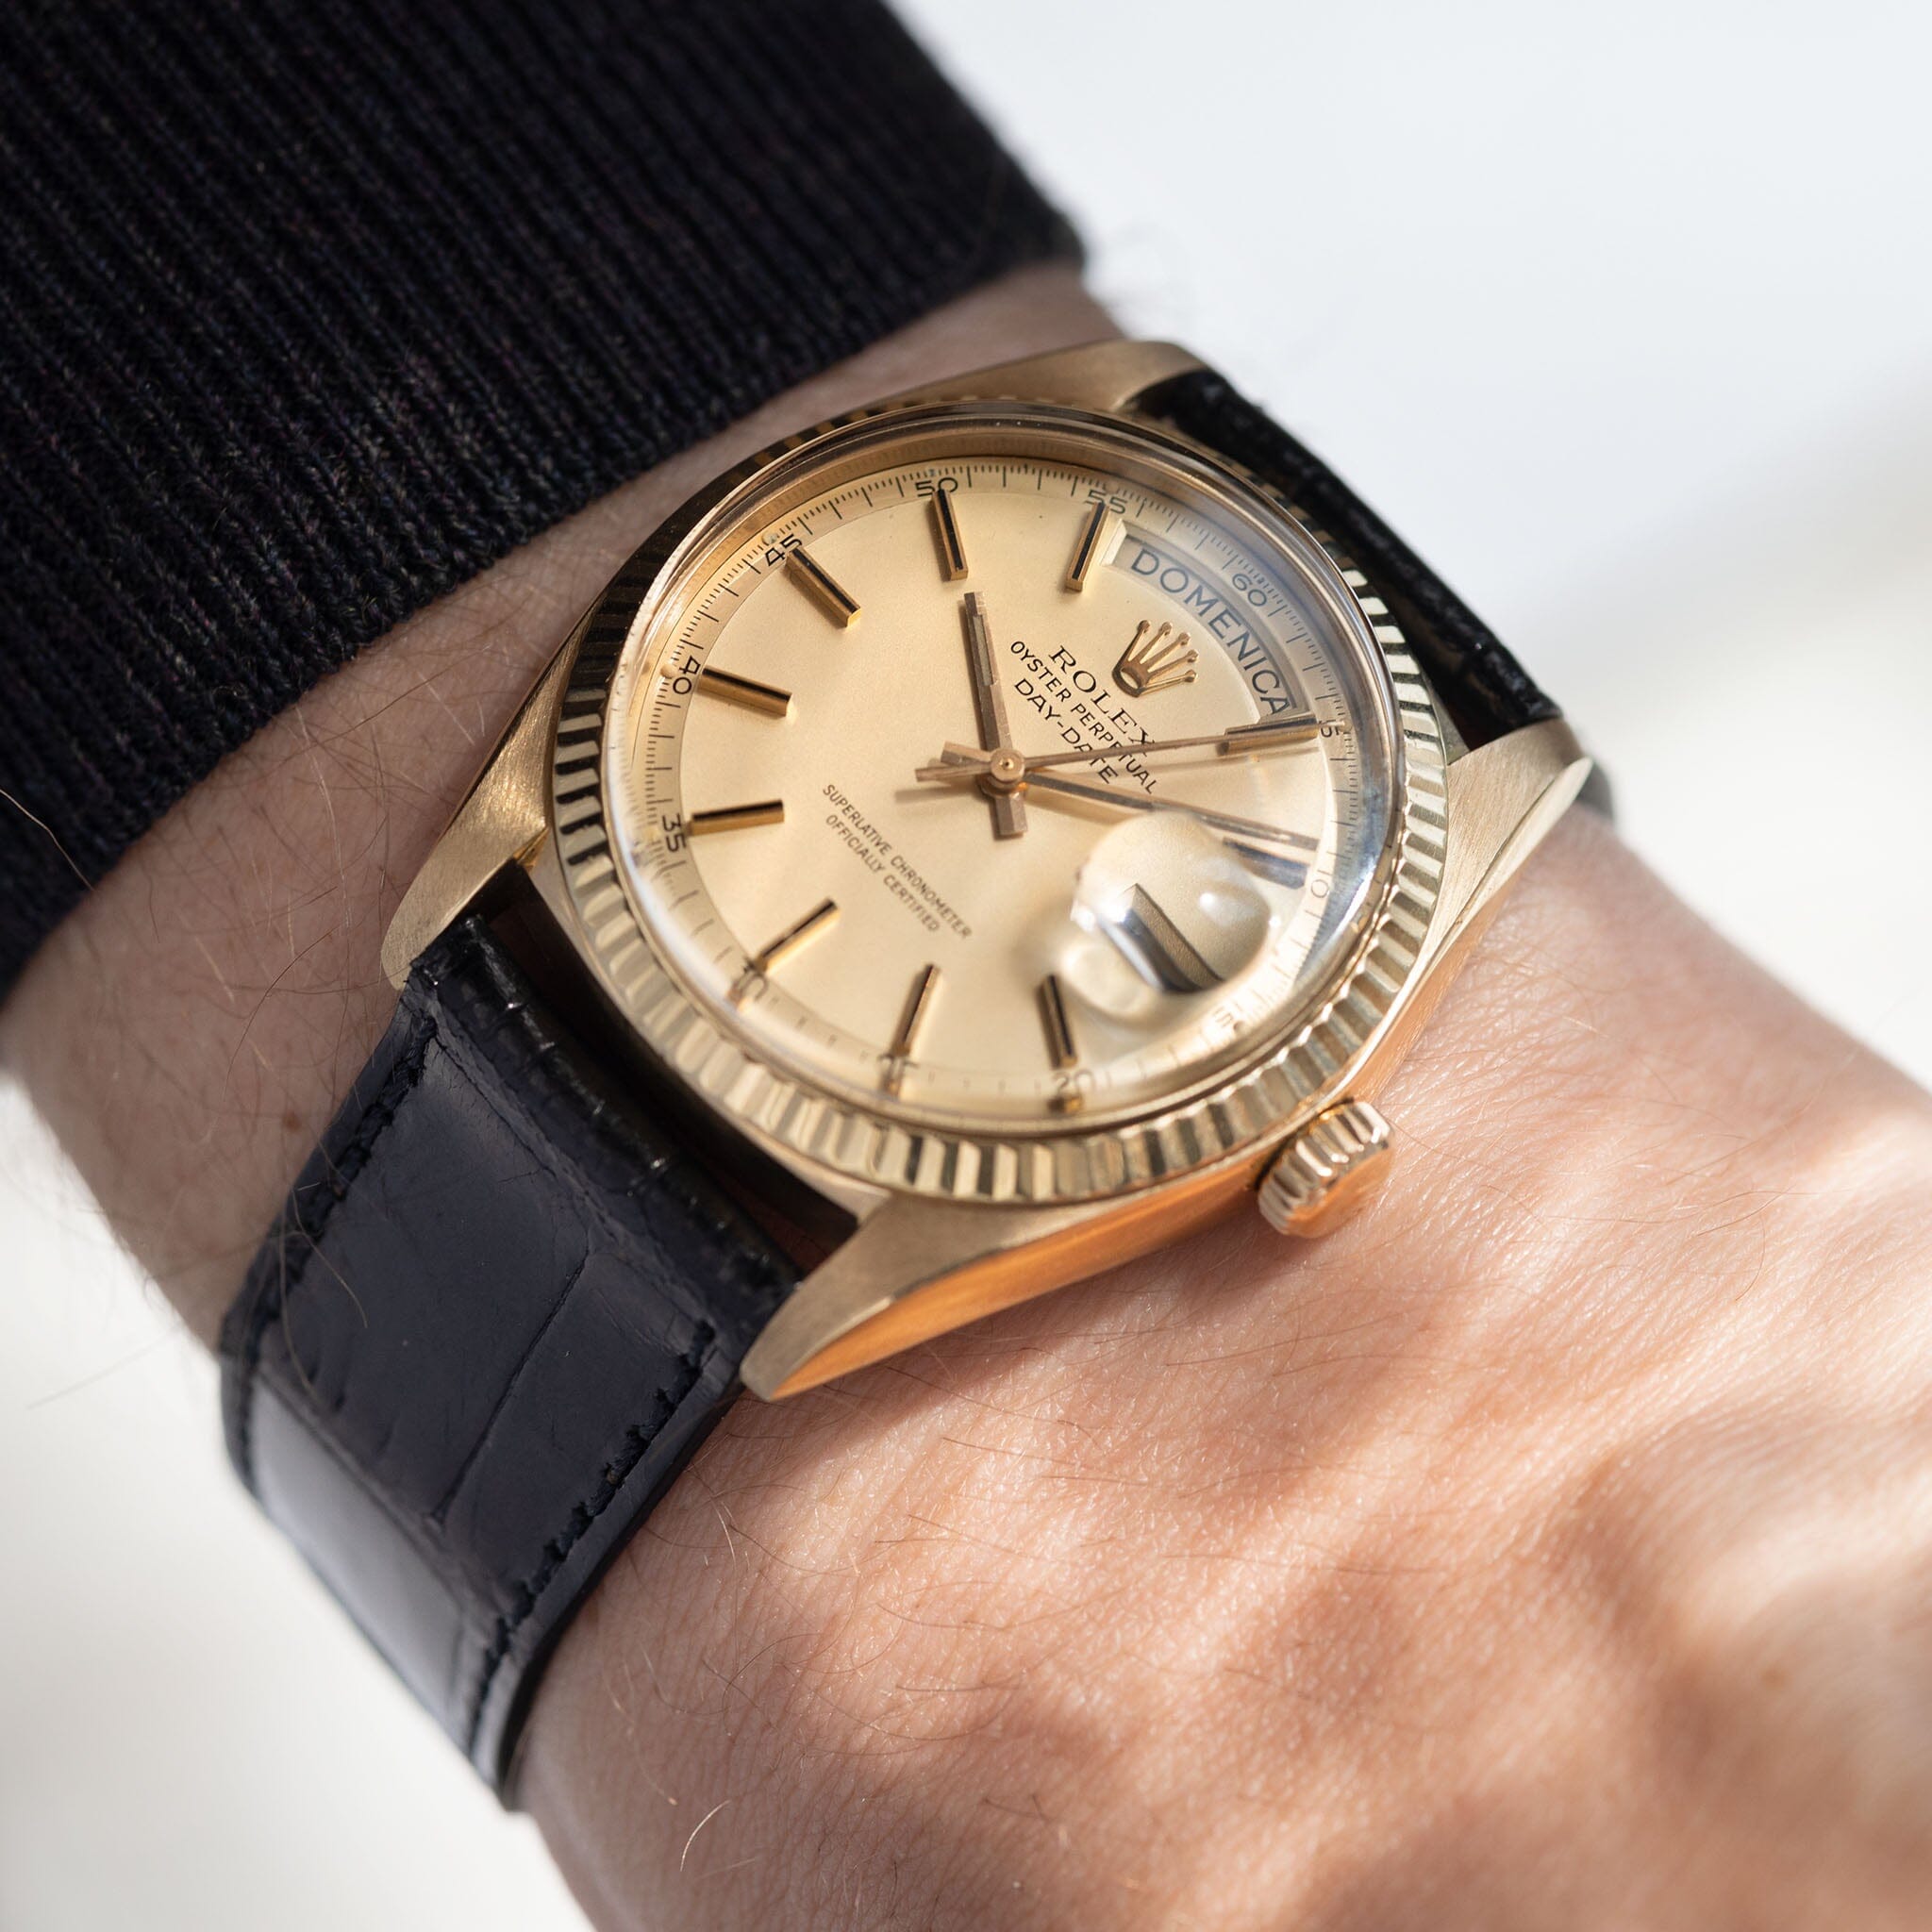 Rolex Oyster Perpetual Stella Dial Day Date – bulangandsons-magazine